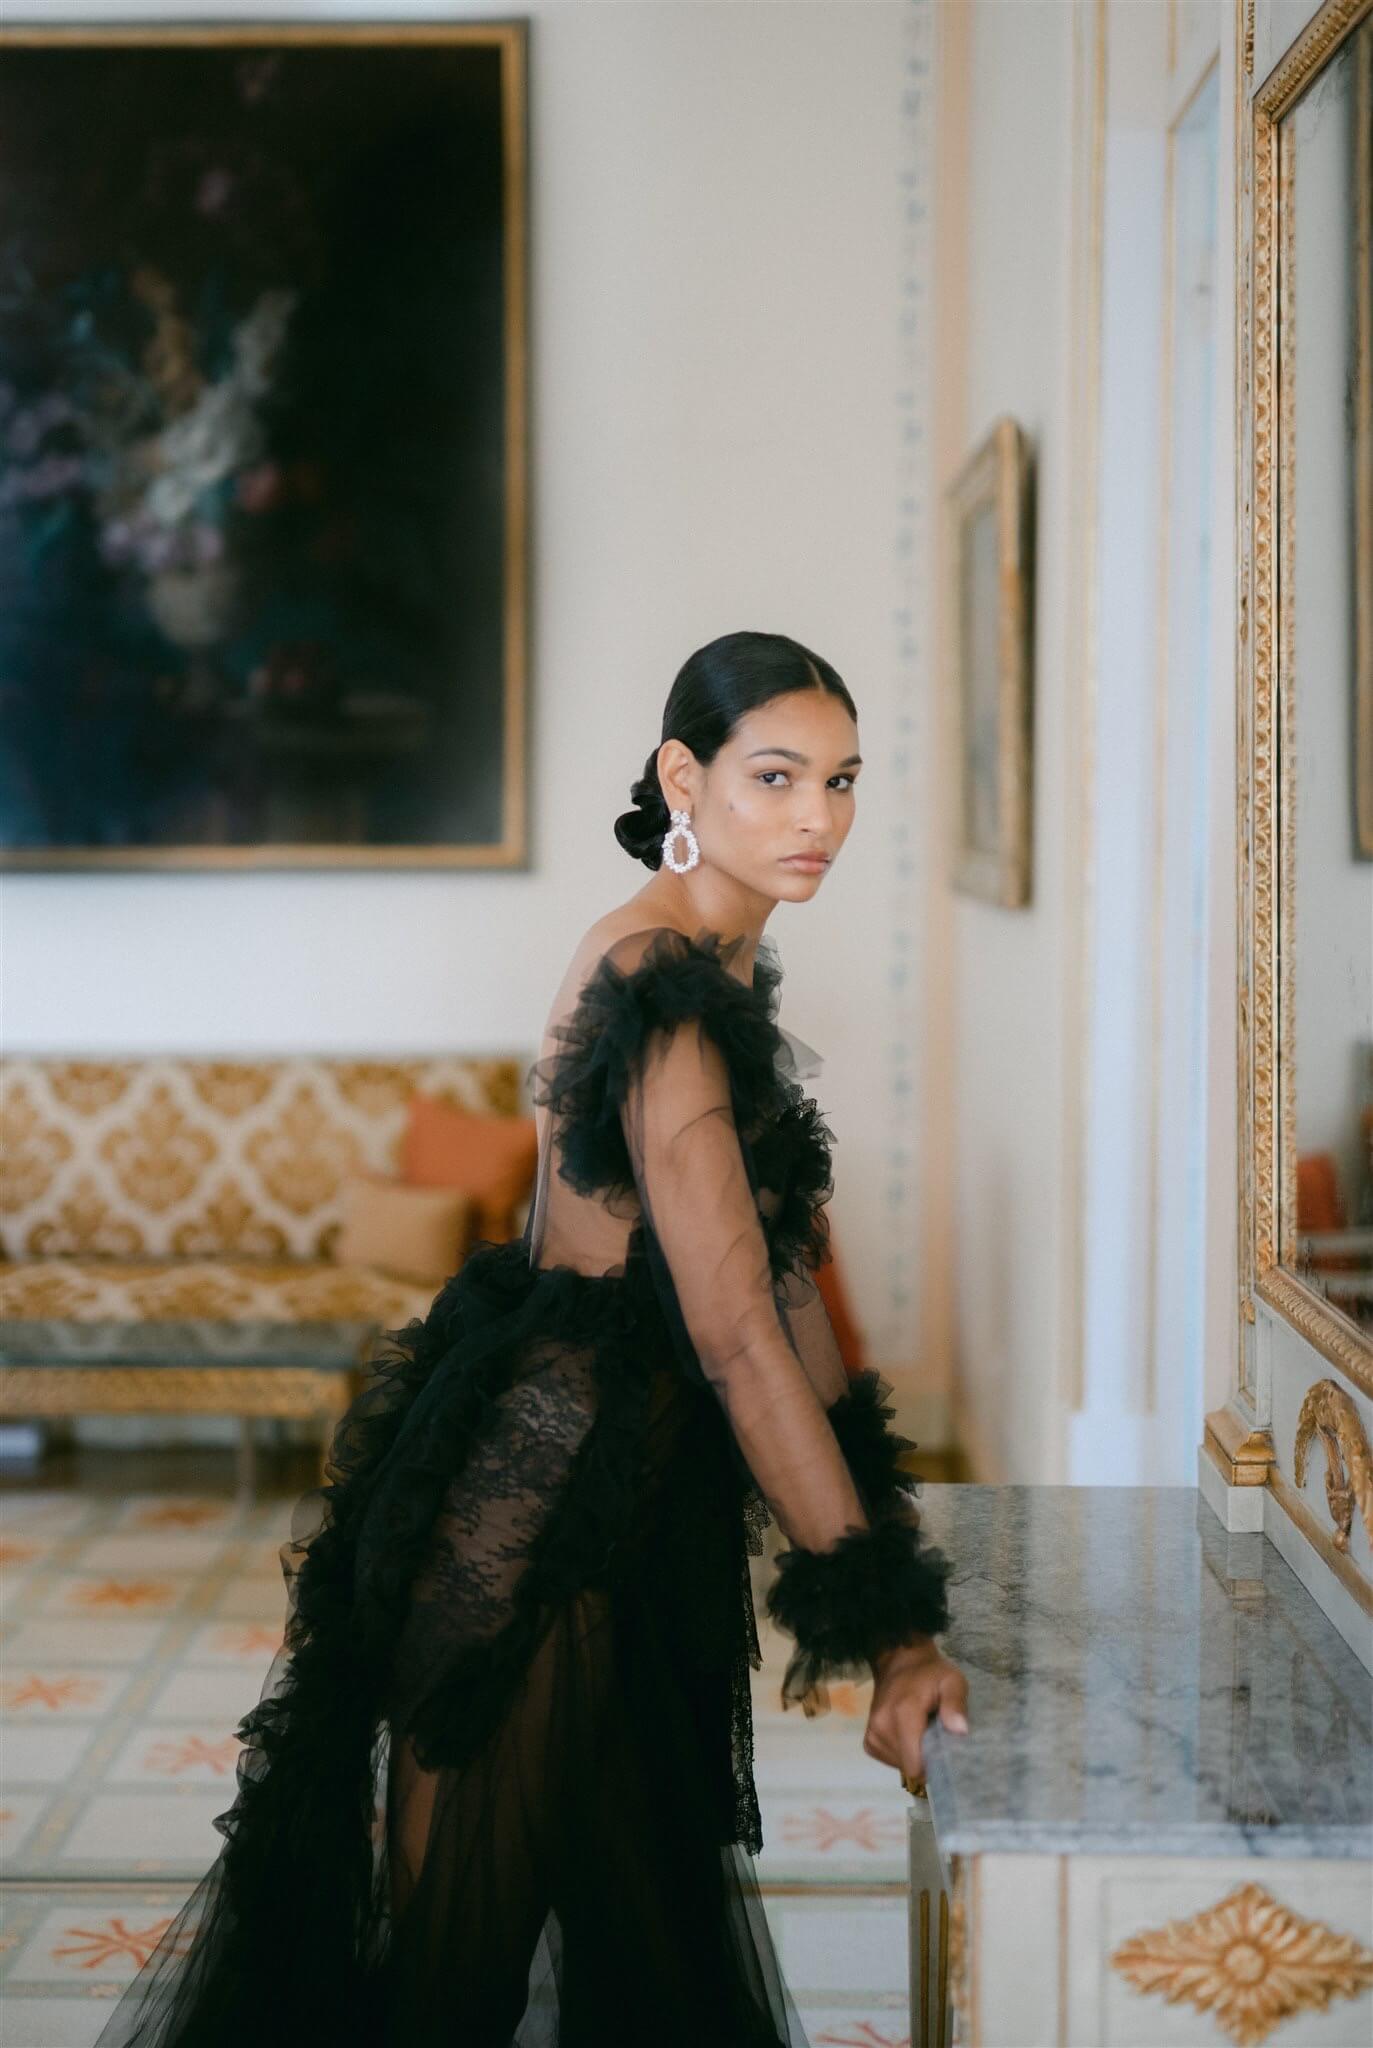 A sophisticated woman in a lavish black gown wearing the Cremilde Bispo Jewellery Garden's Delight statement earrings in sterling silver, posing in front of an luxury hotel mirror.